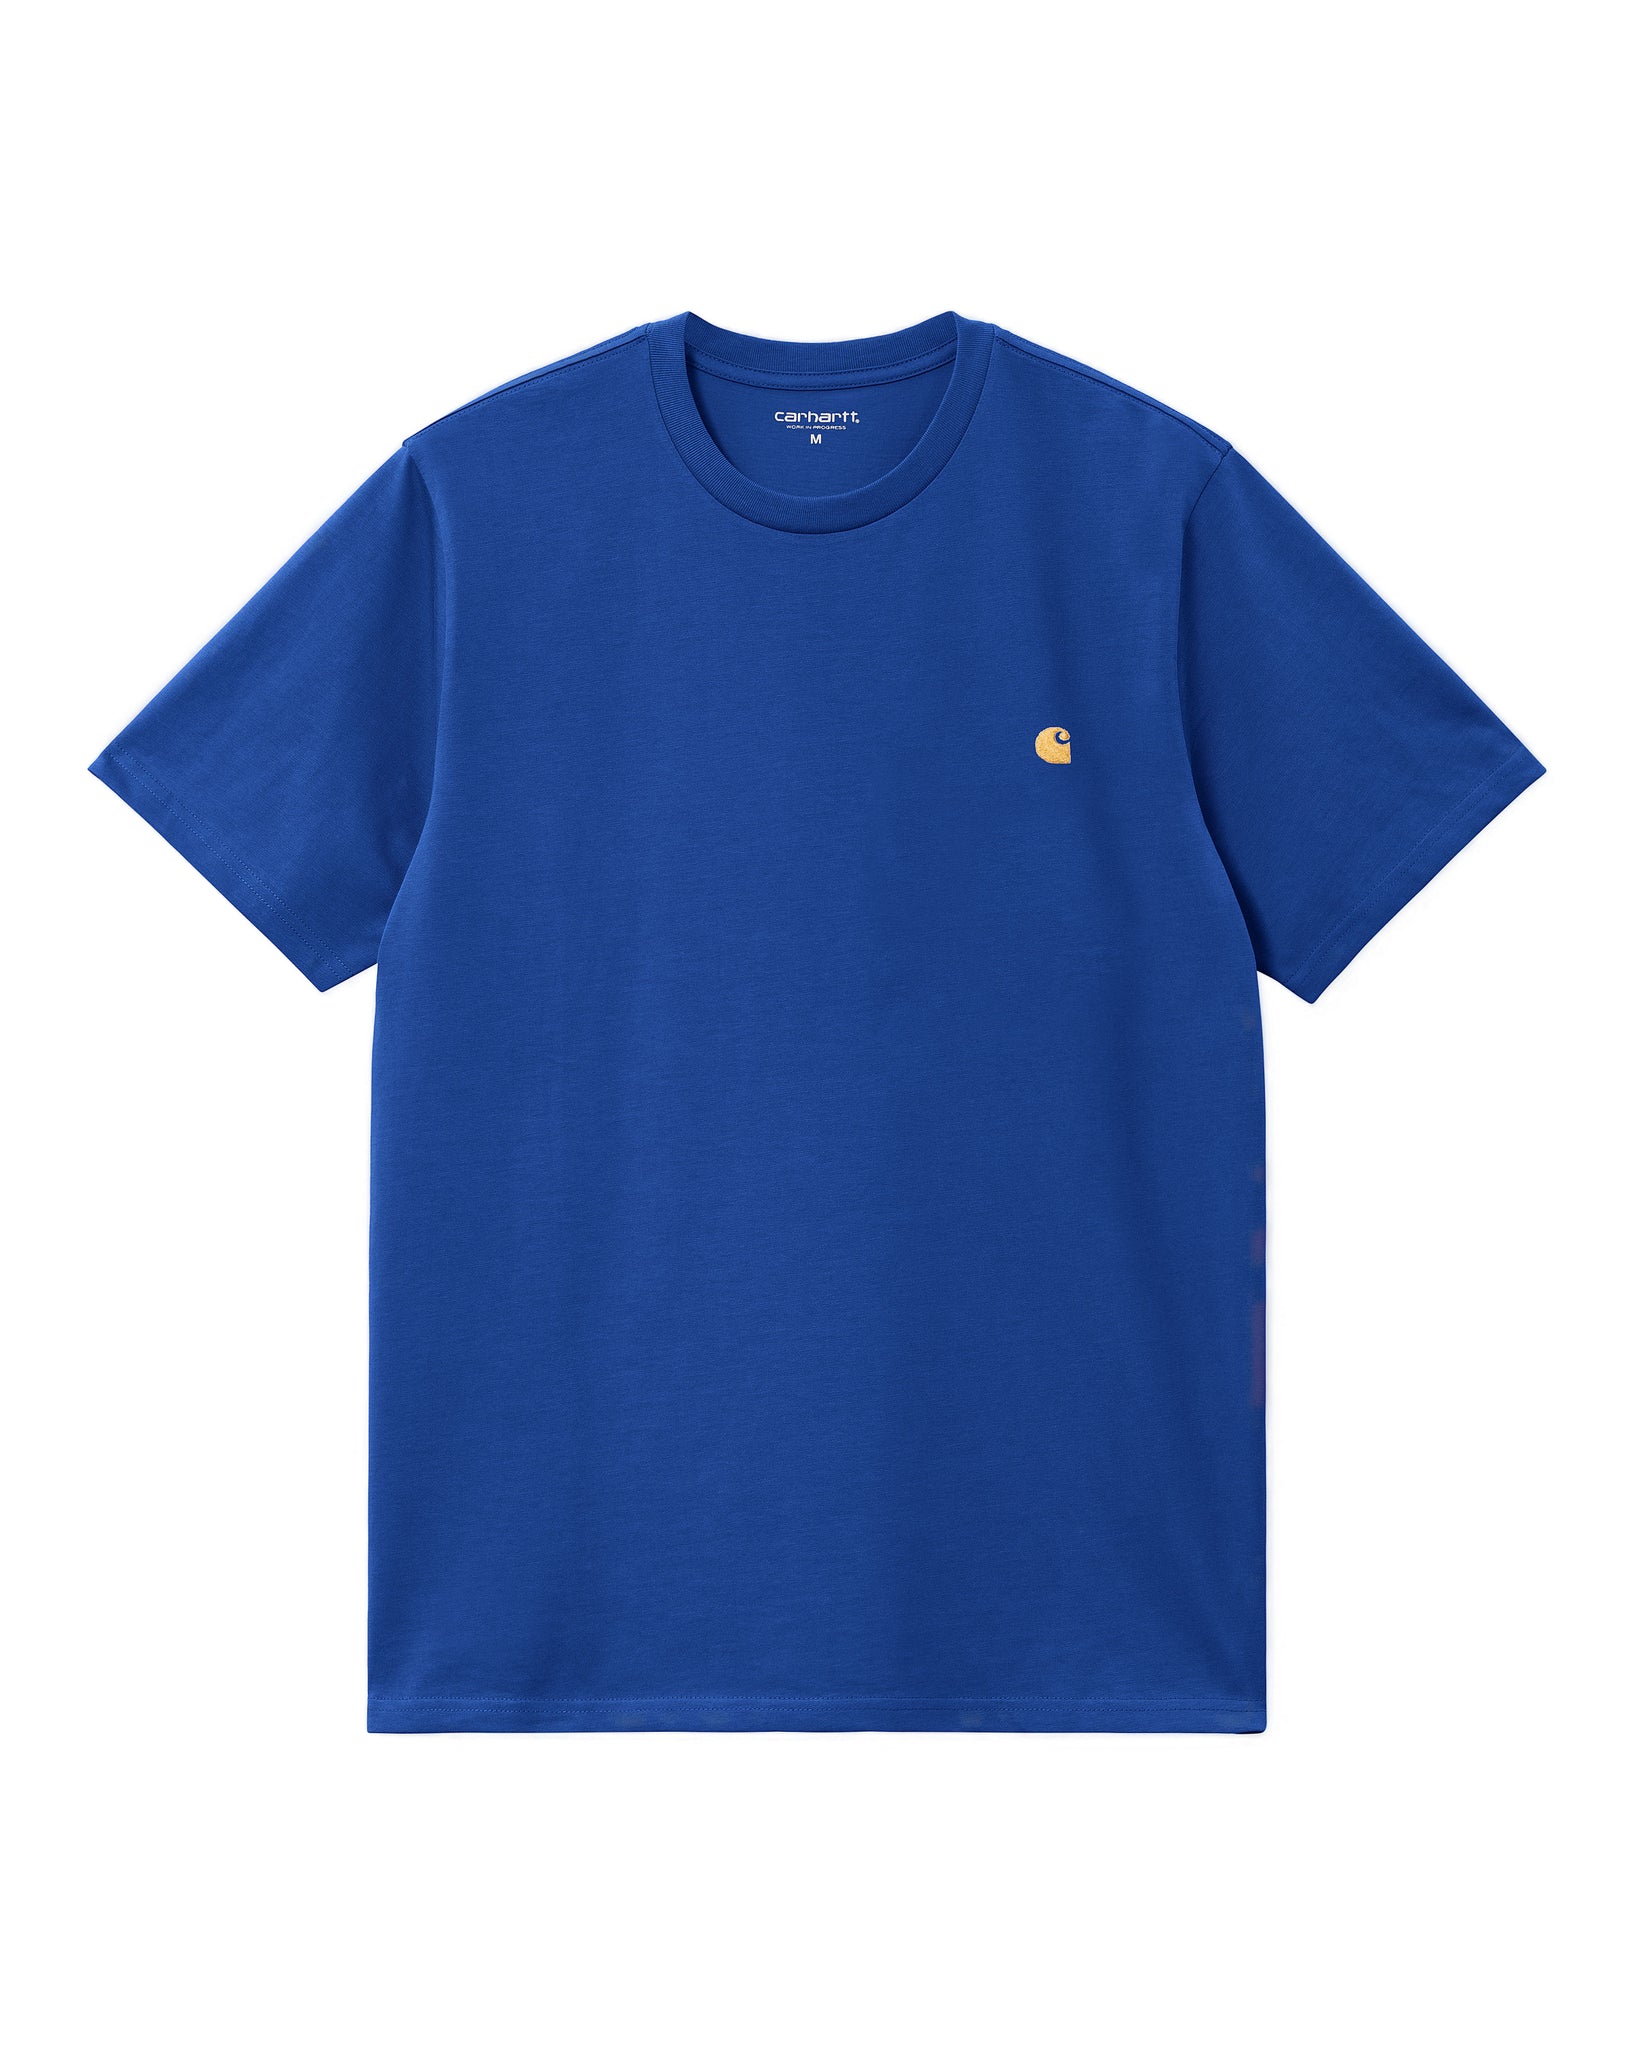 SS Chase T-Shirt - Acapulco/Gold